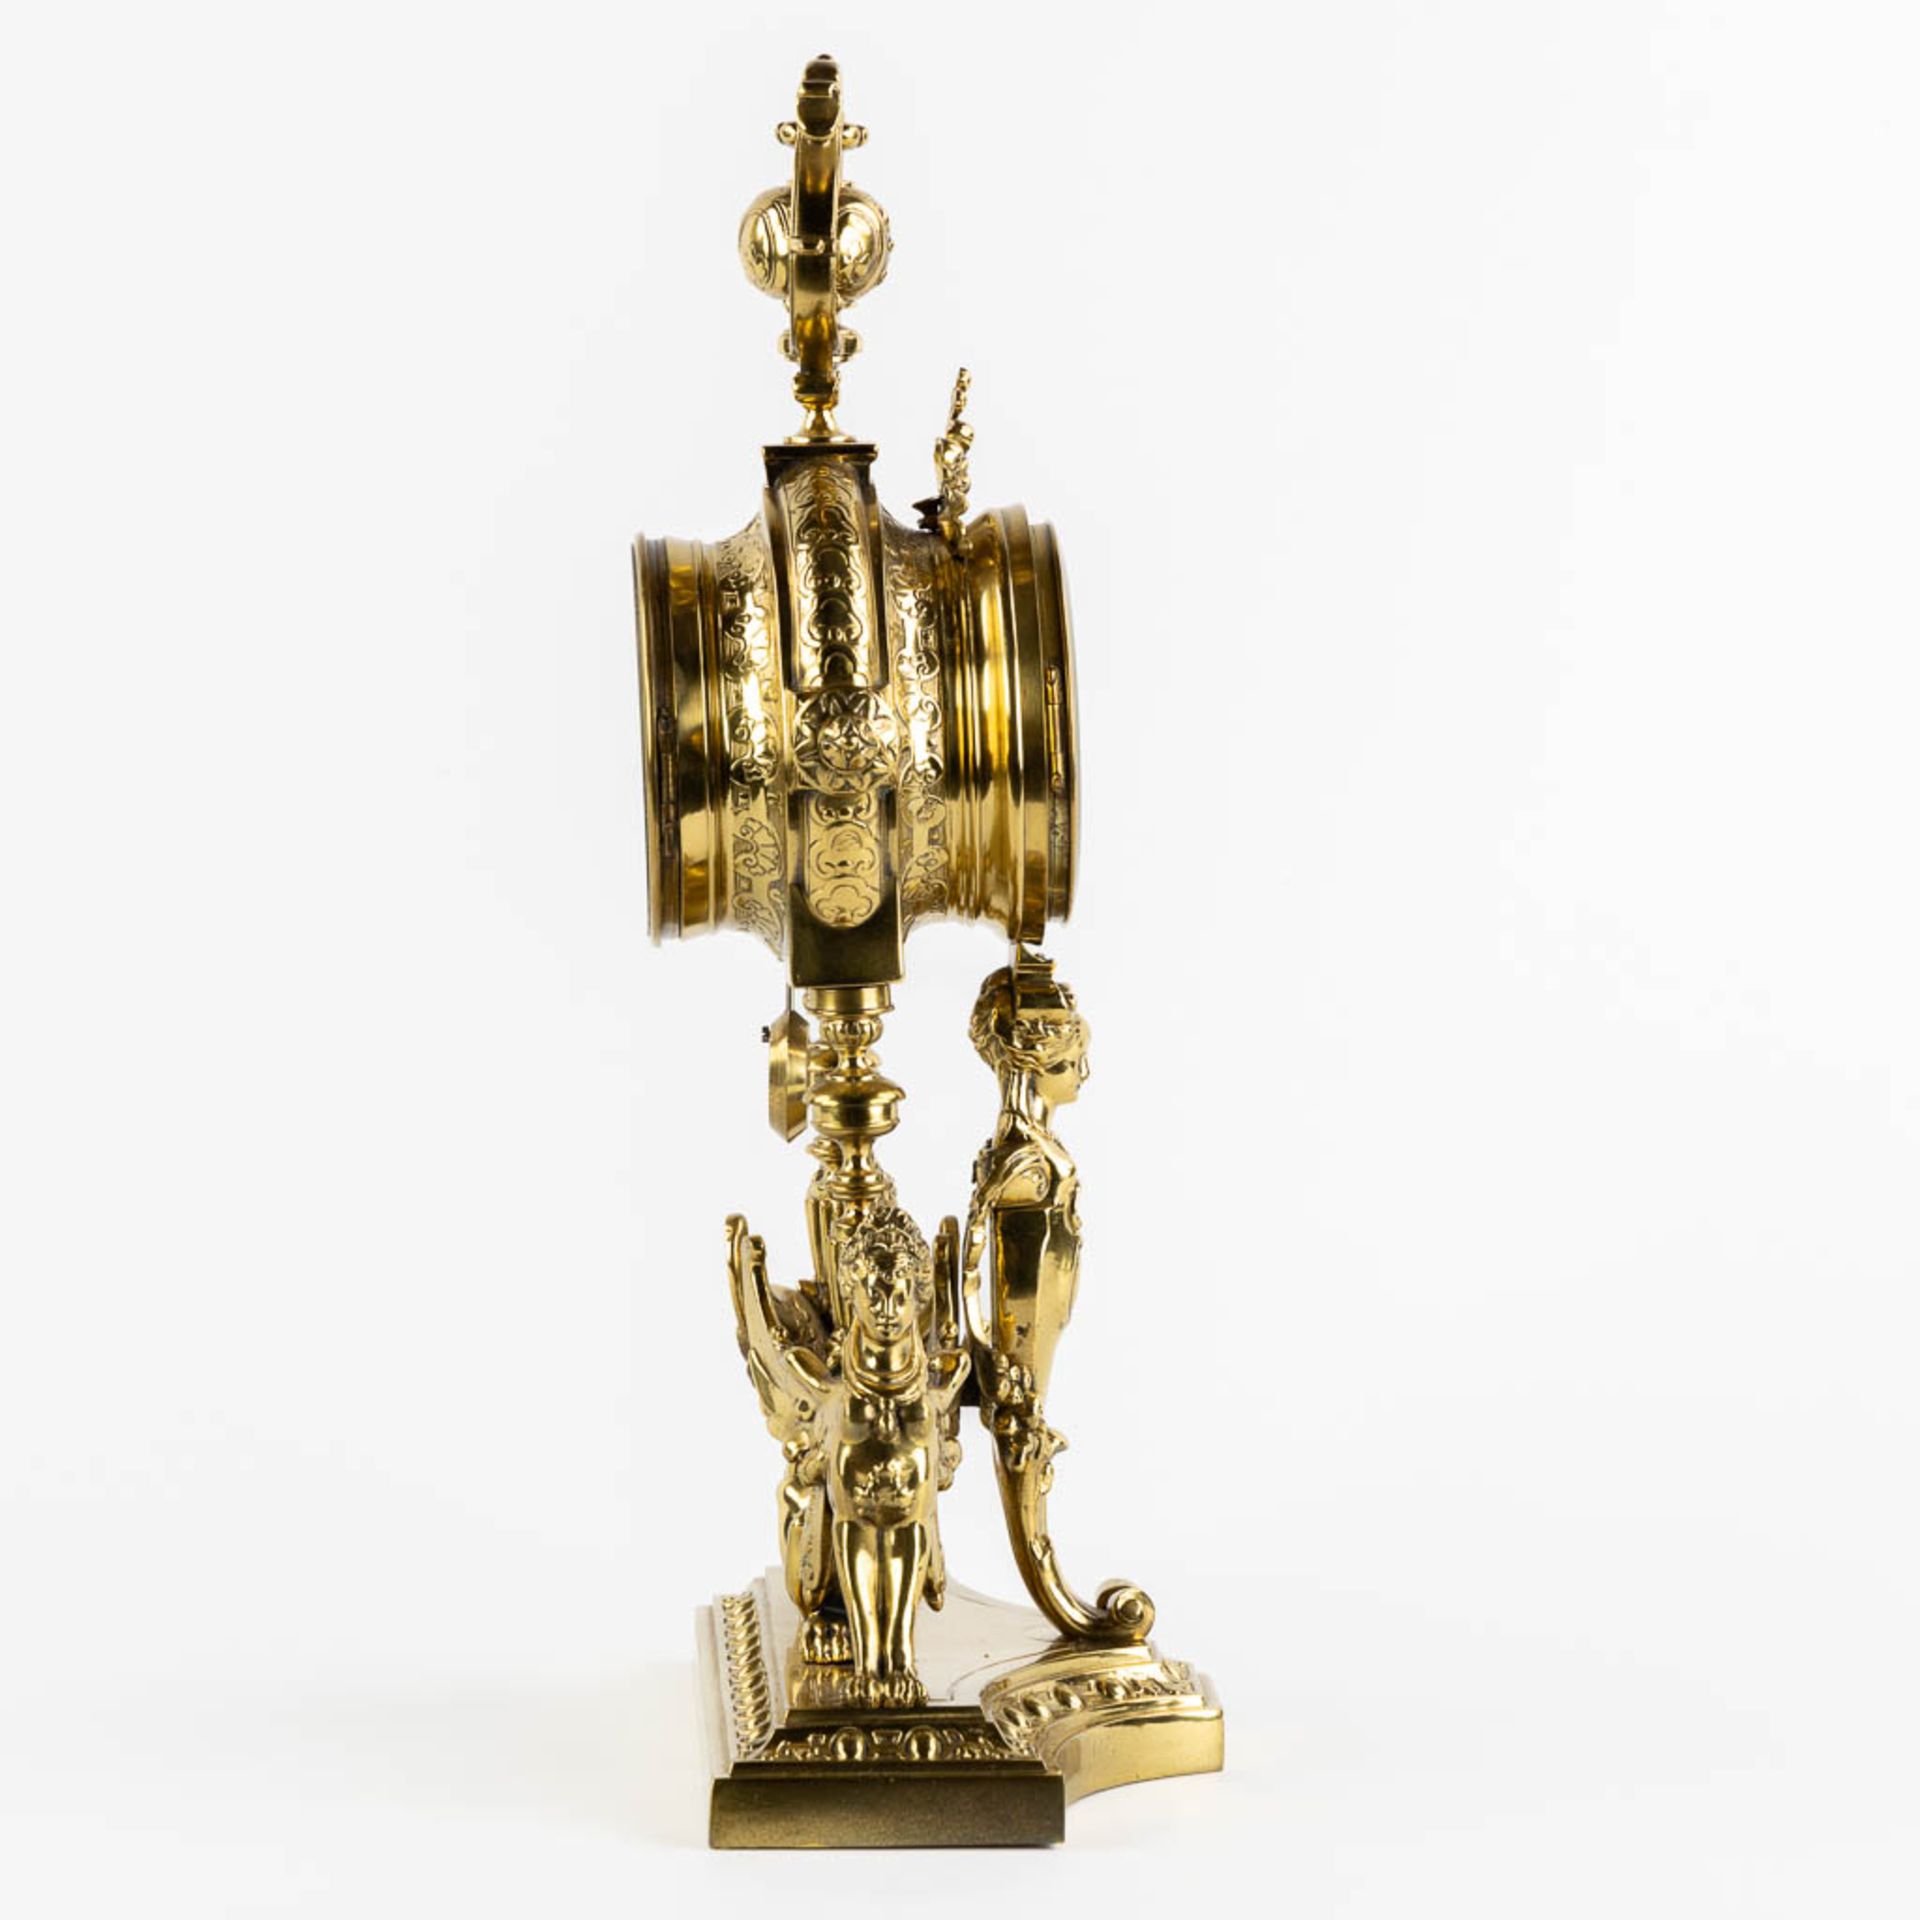 A mantle clock, polished bronze, decorated with Mythological Figures. Circa 1880. (L:15 x W:26 x H:4 - Image 4 of 12